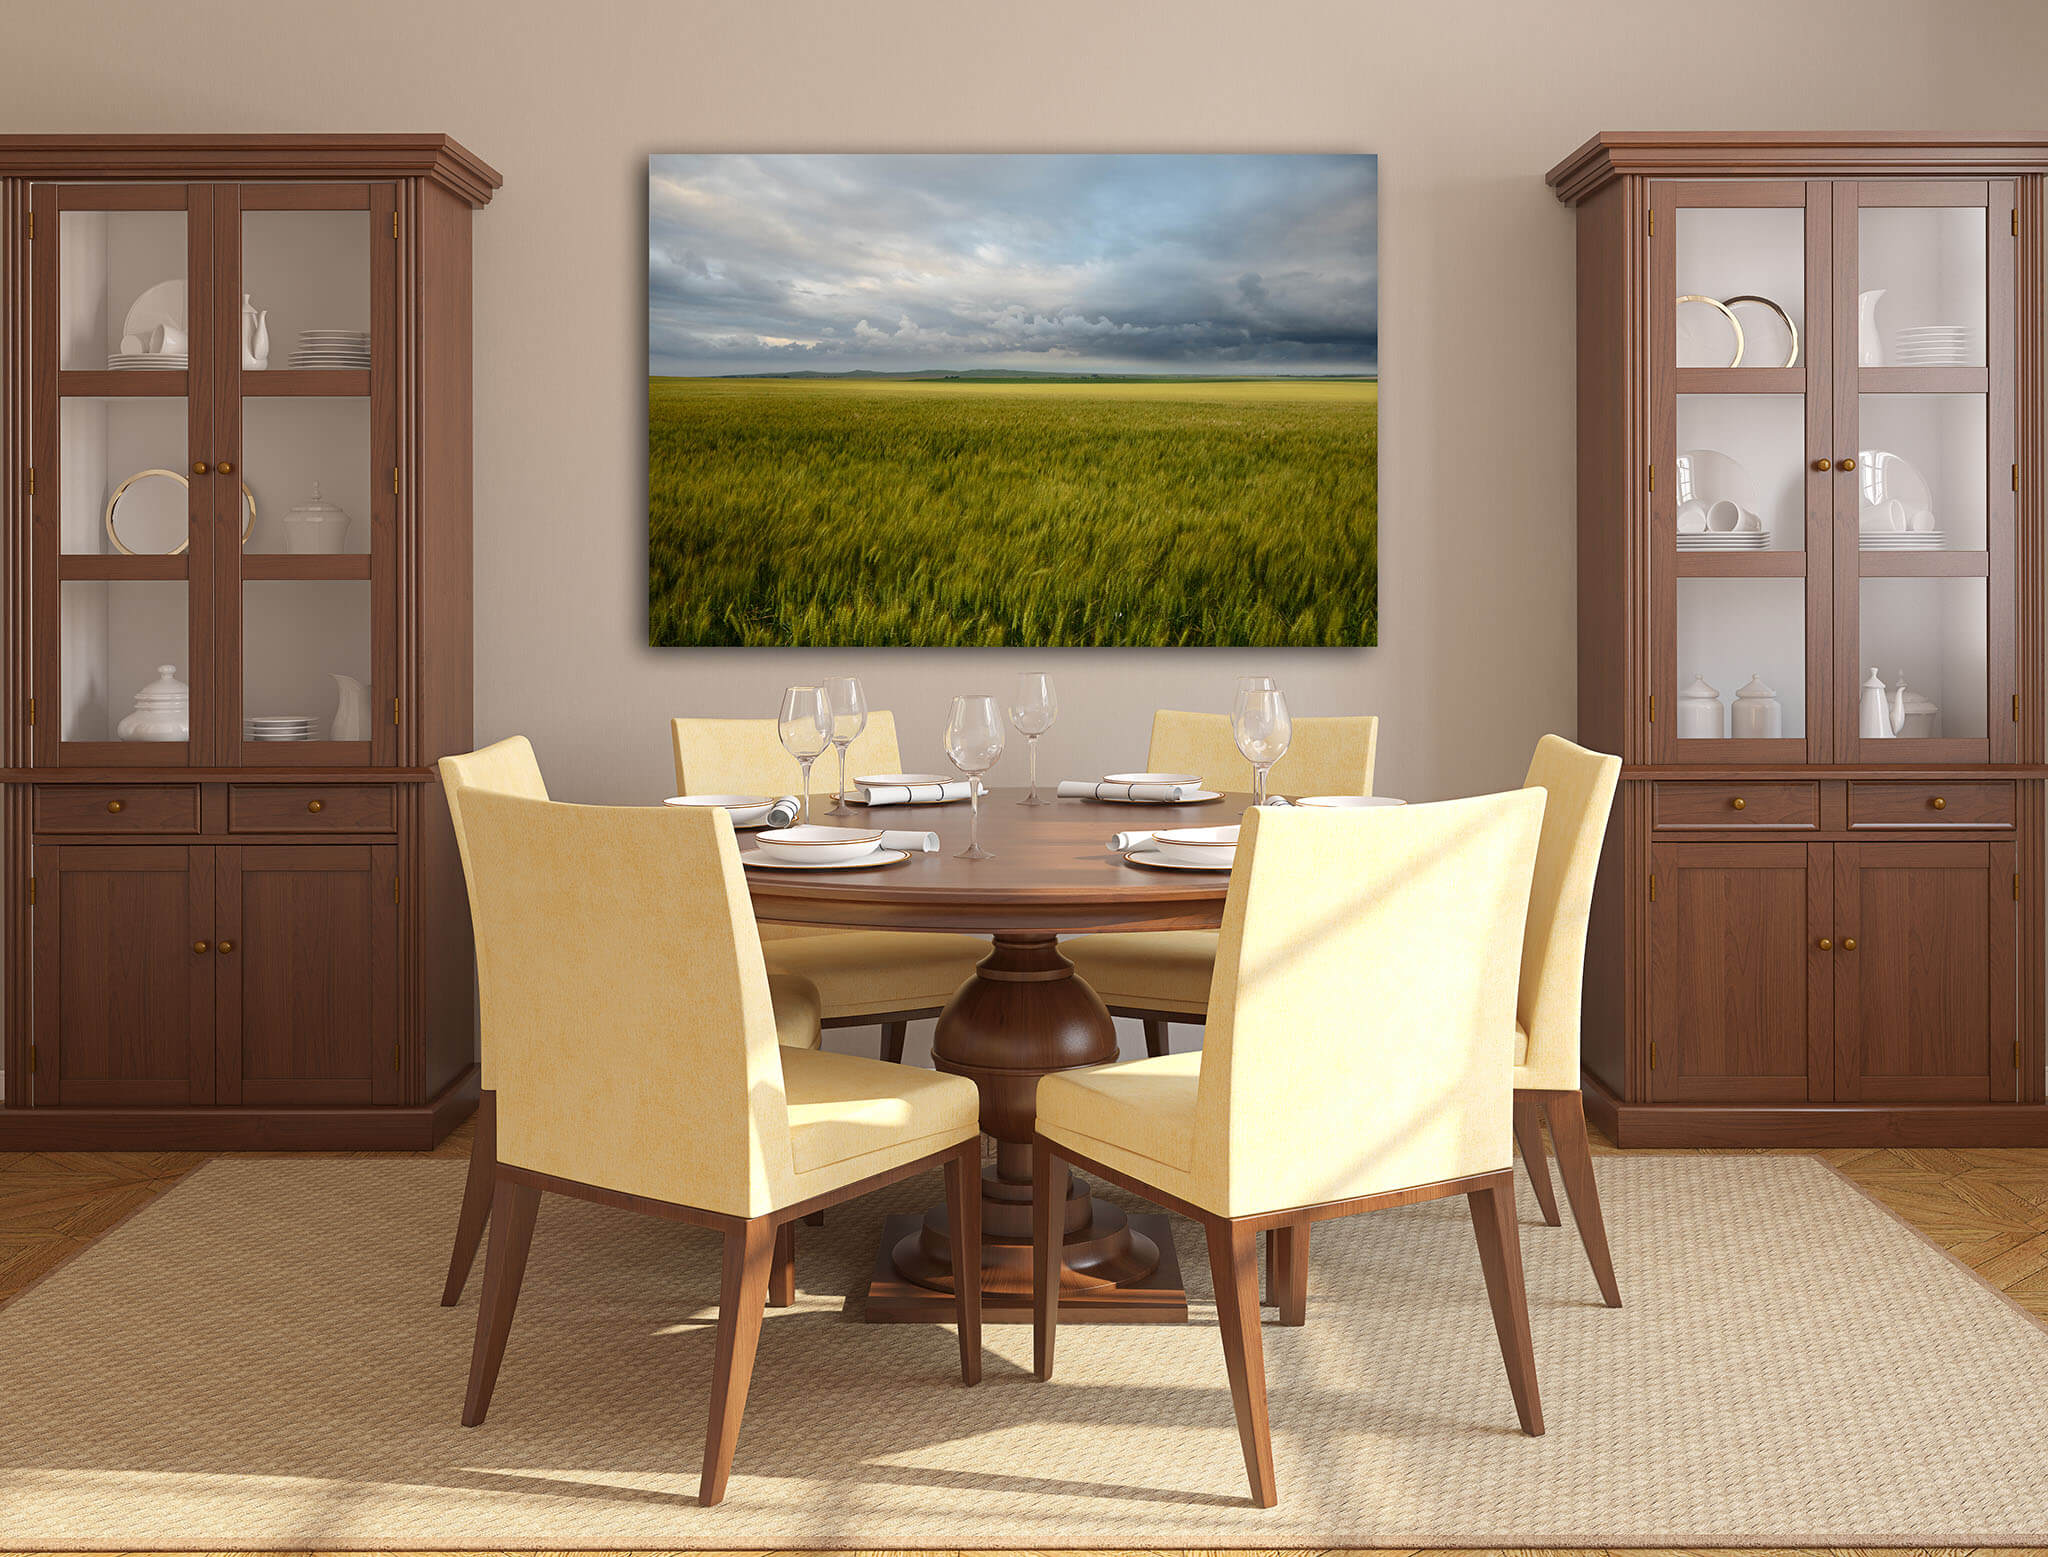 kitchen and dining room wall decor